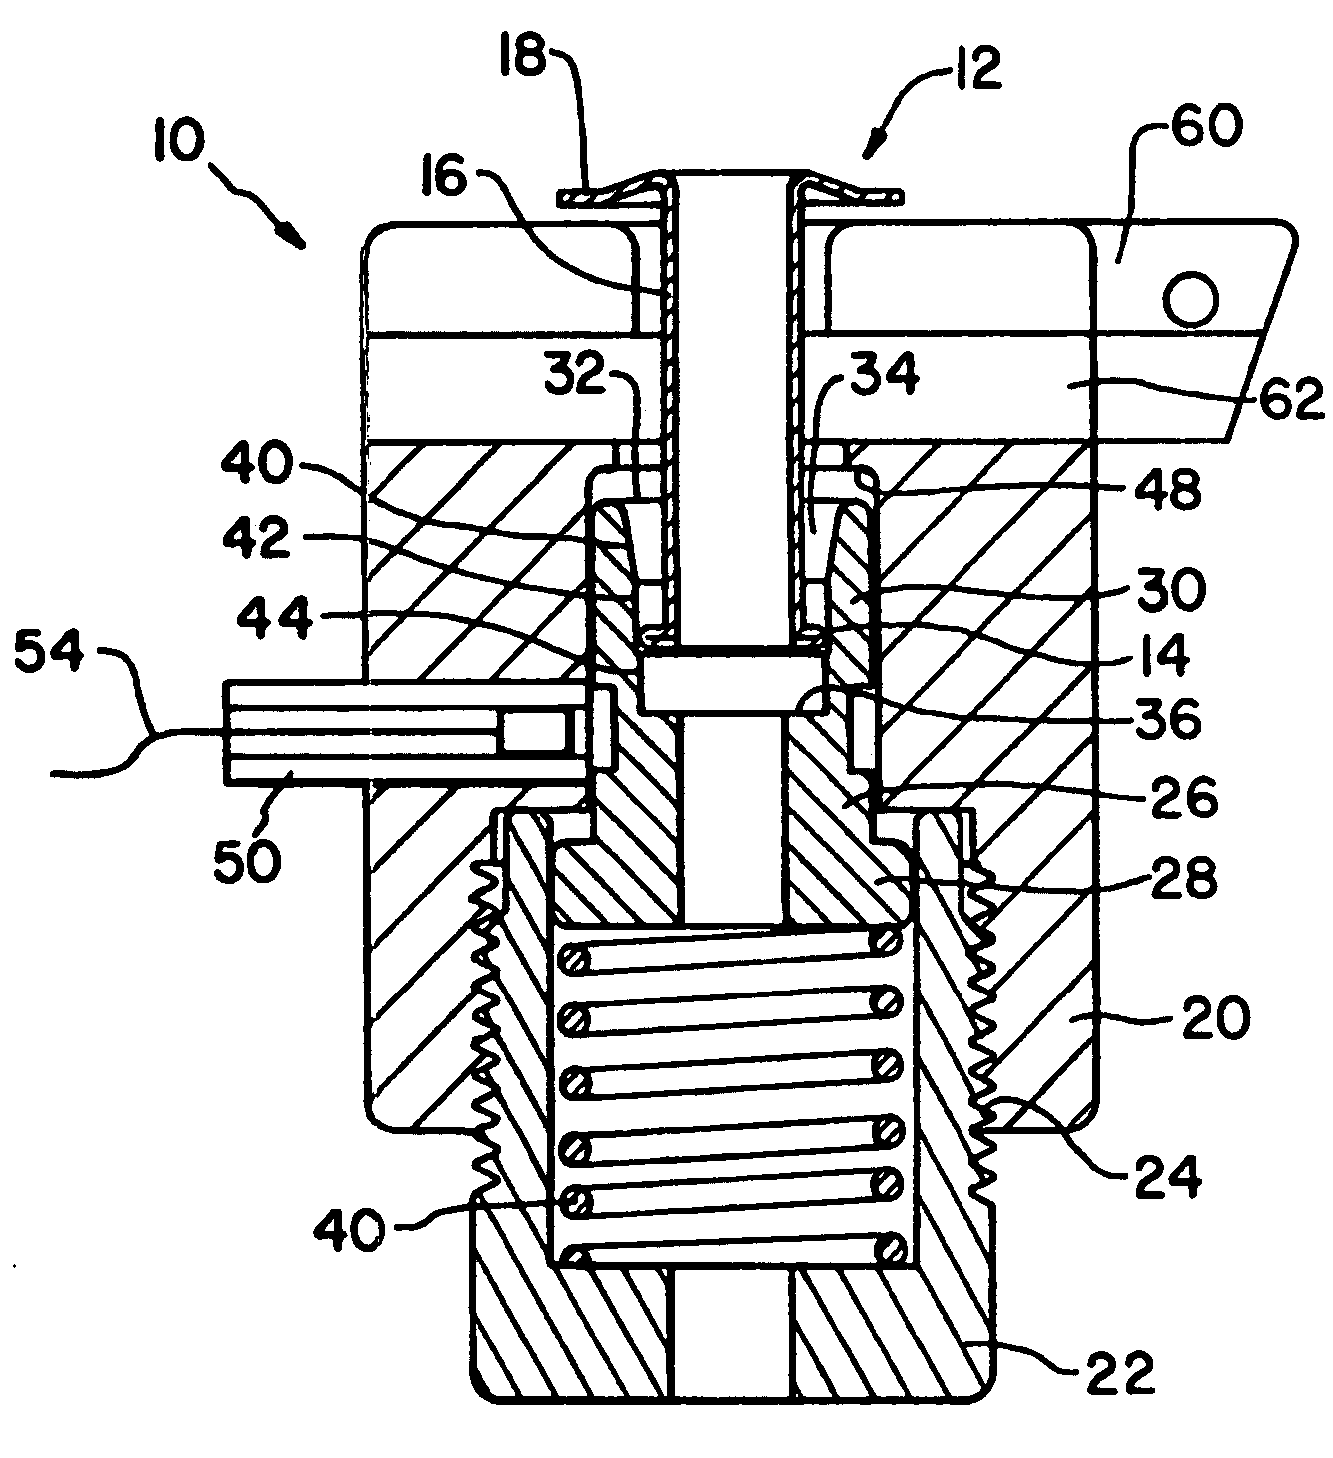 Measurement device and process